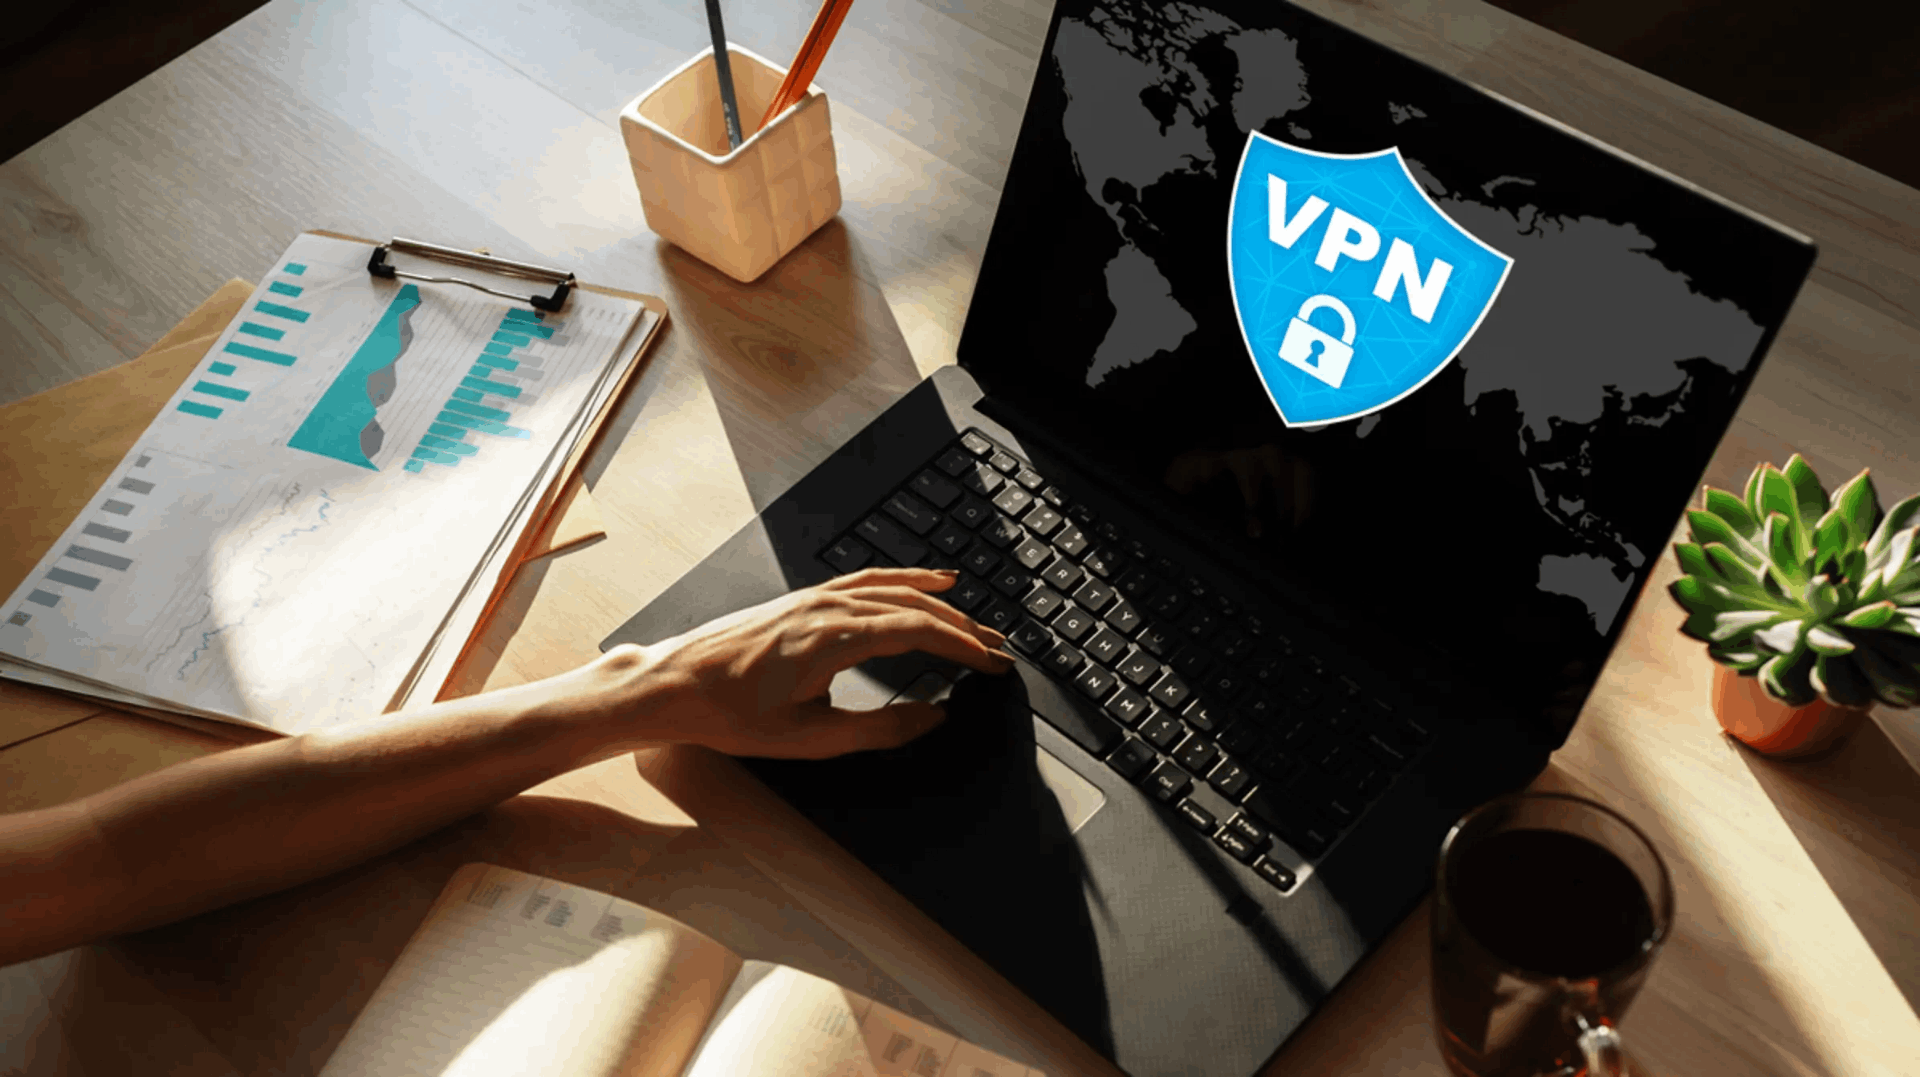 Understand Why and How VPNs Make the Internet Safer